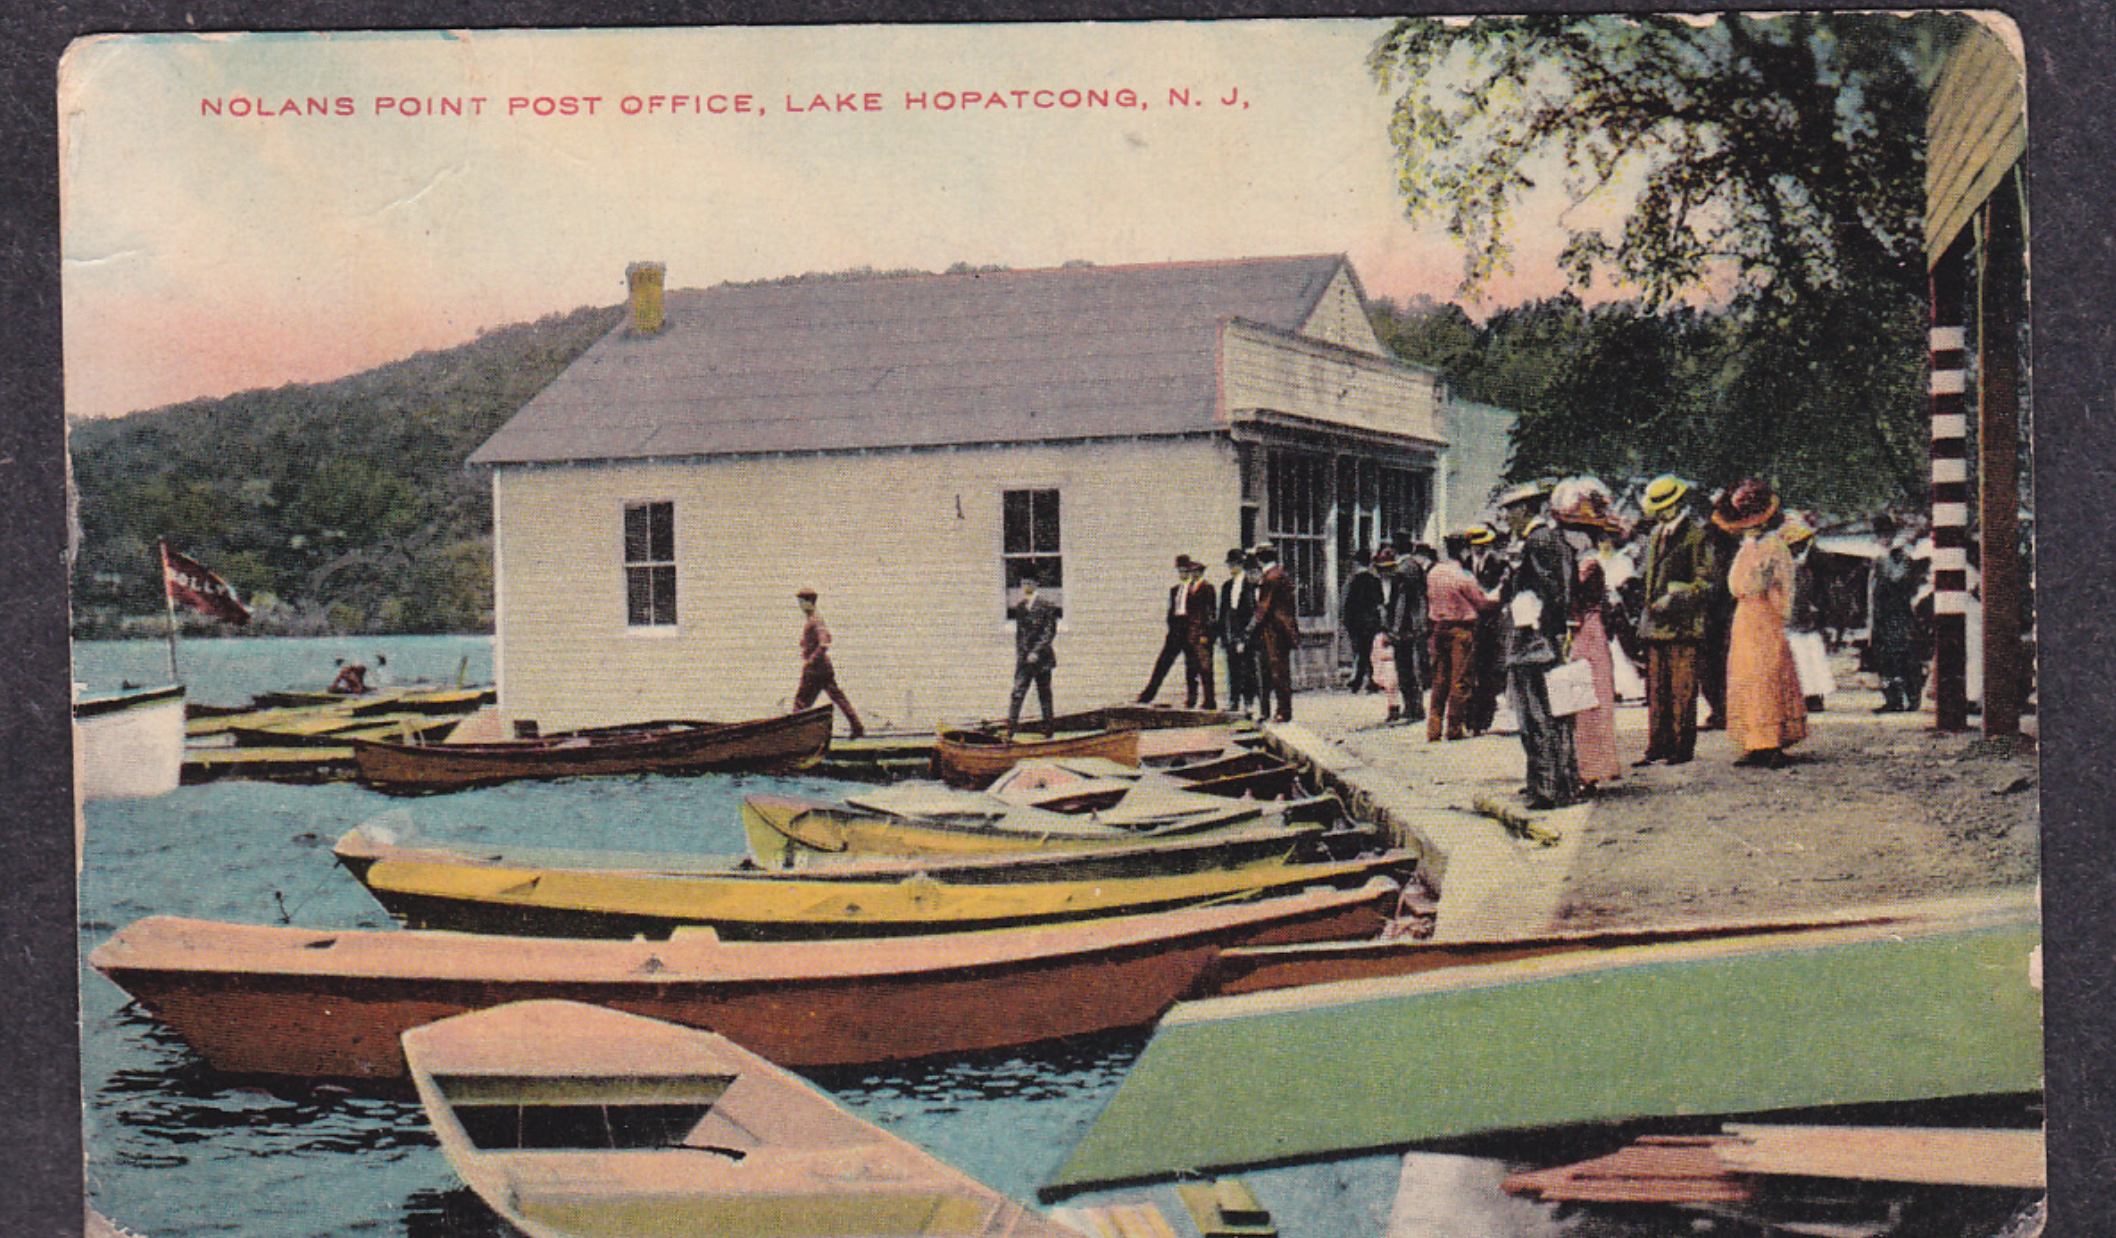 Lake Hopatcong - Post Office at Noolans Point - 1912